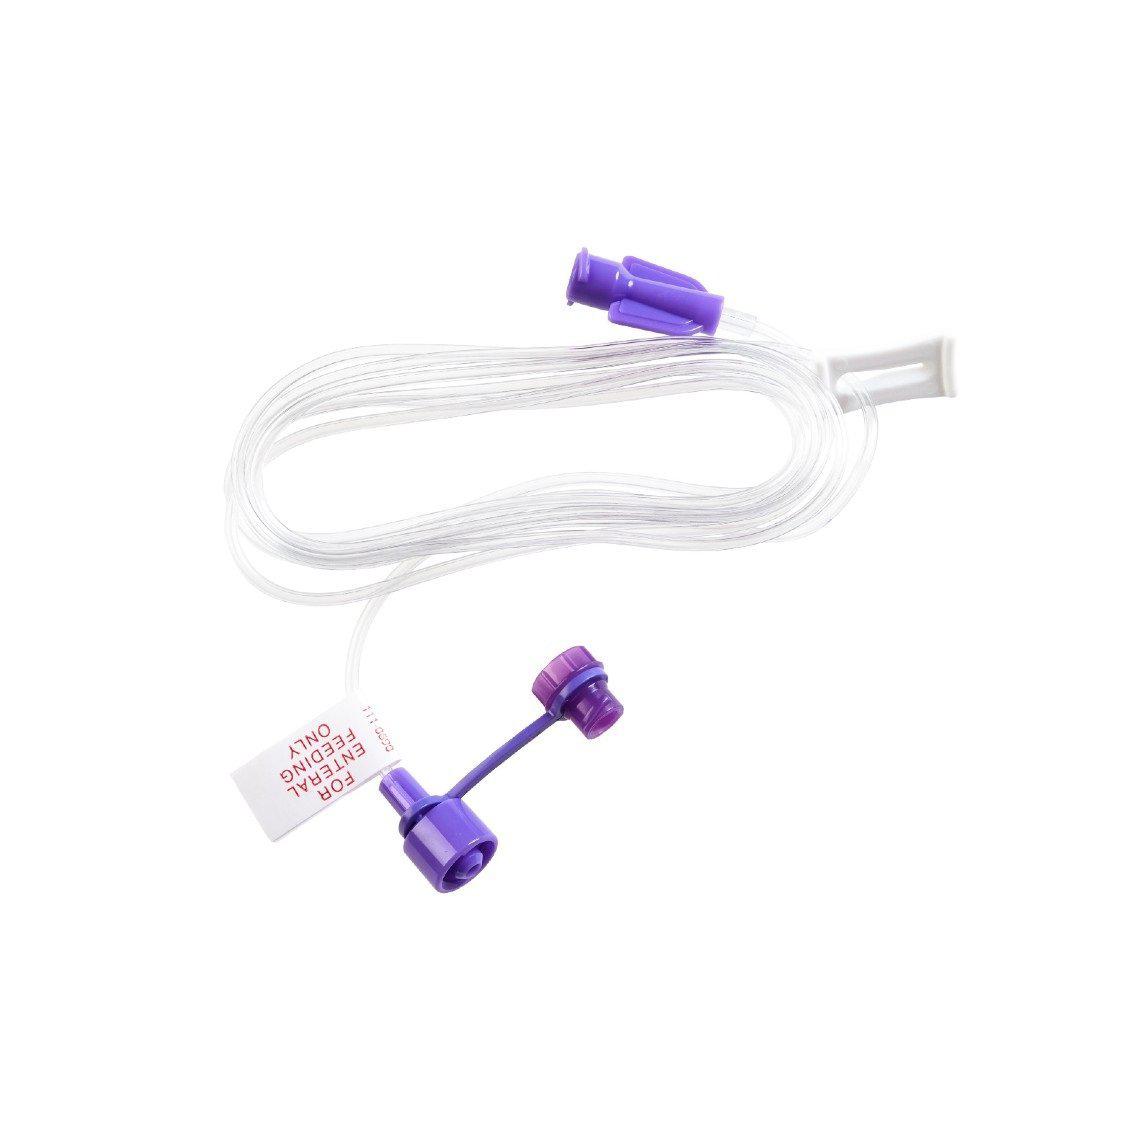 Kangaroo™ Feeding Tube with ENFit™ Connection Extension Sets